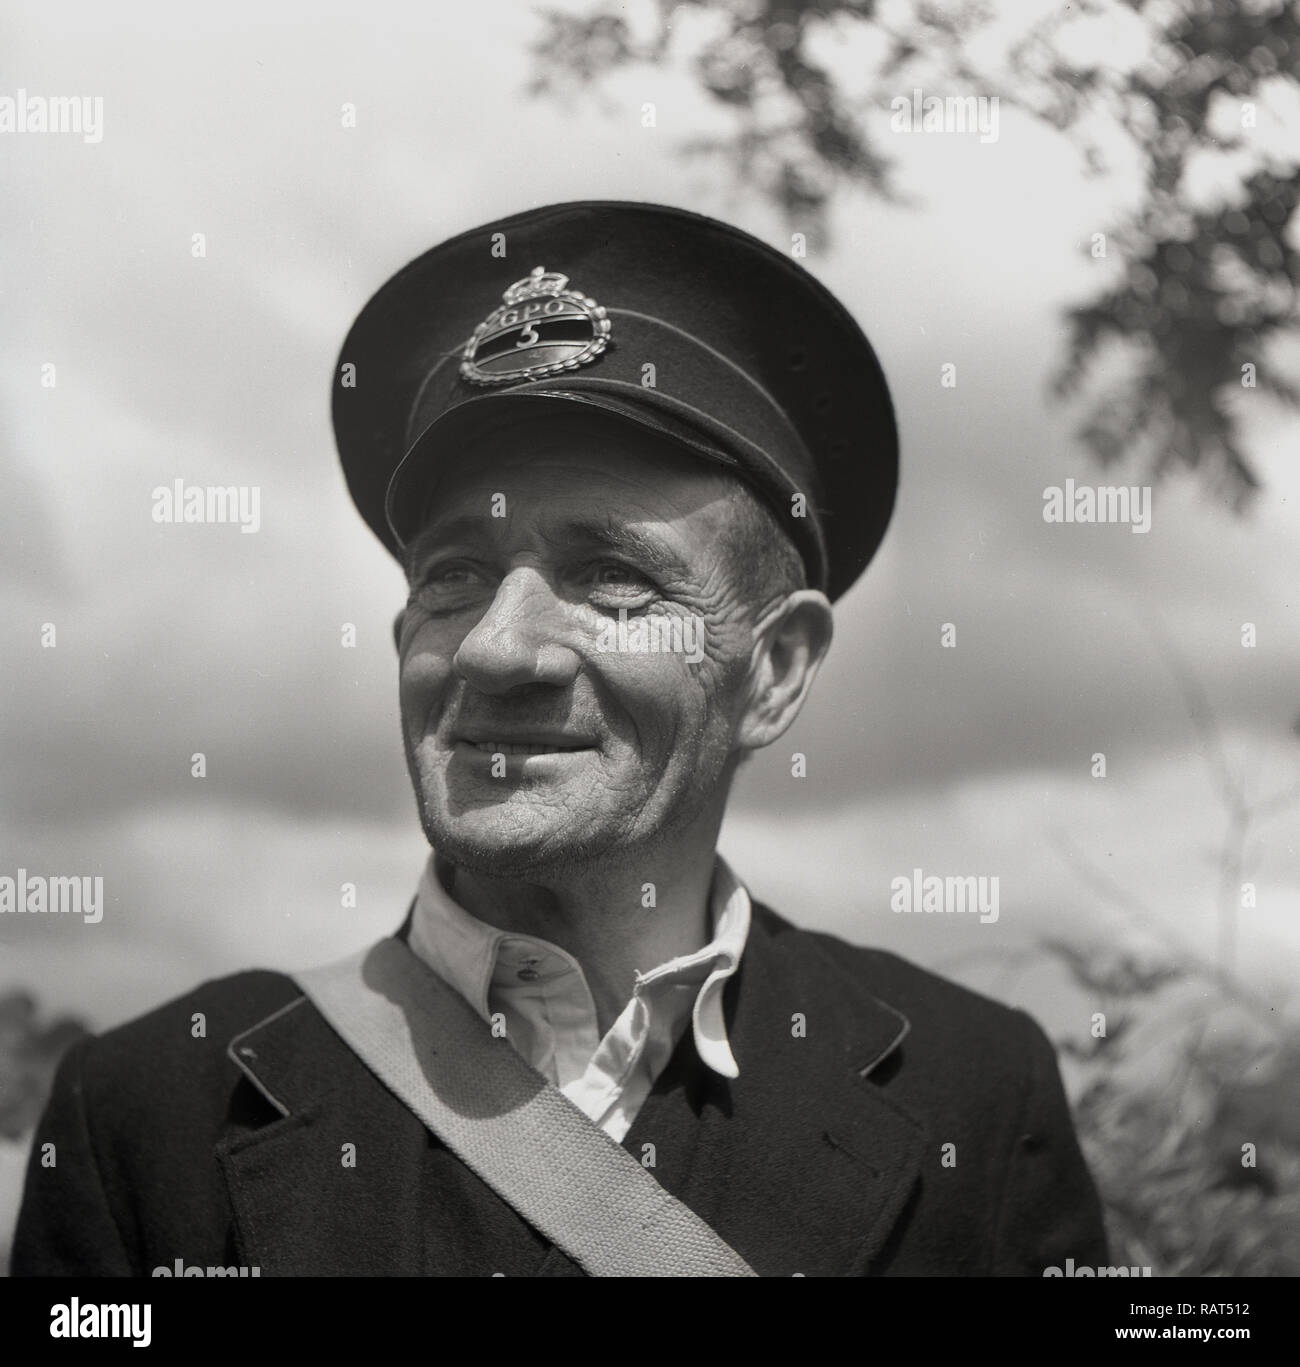 1950s, historical, portrait of a GPO postman in uniform and cap, with Kings Crown brass badge. Established in England in 1660, the General Post Office combined the functions of the state postal system and telecommunications until it was abolished in 1969 and its assets transferred to The Post Officec. Stock Photo